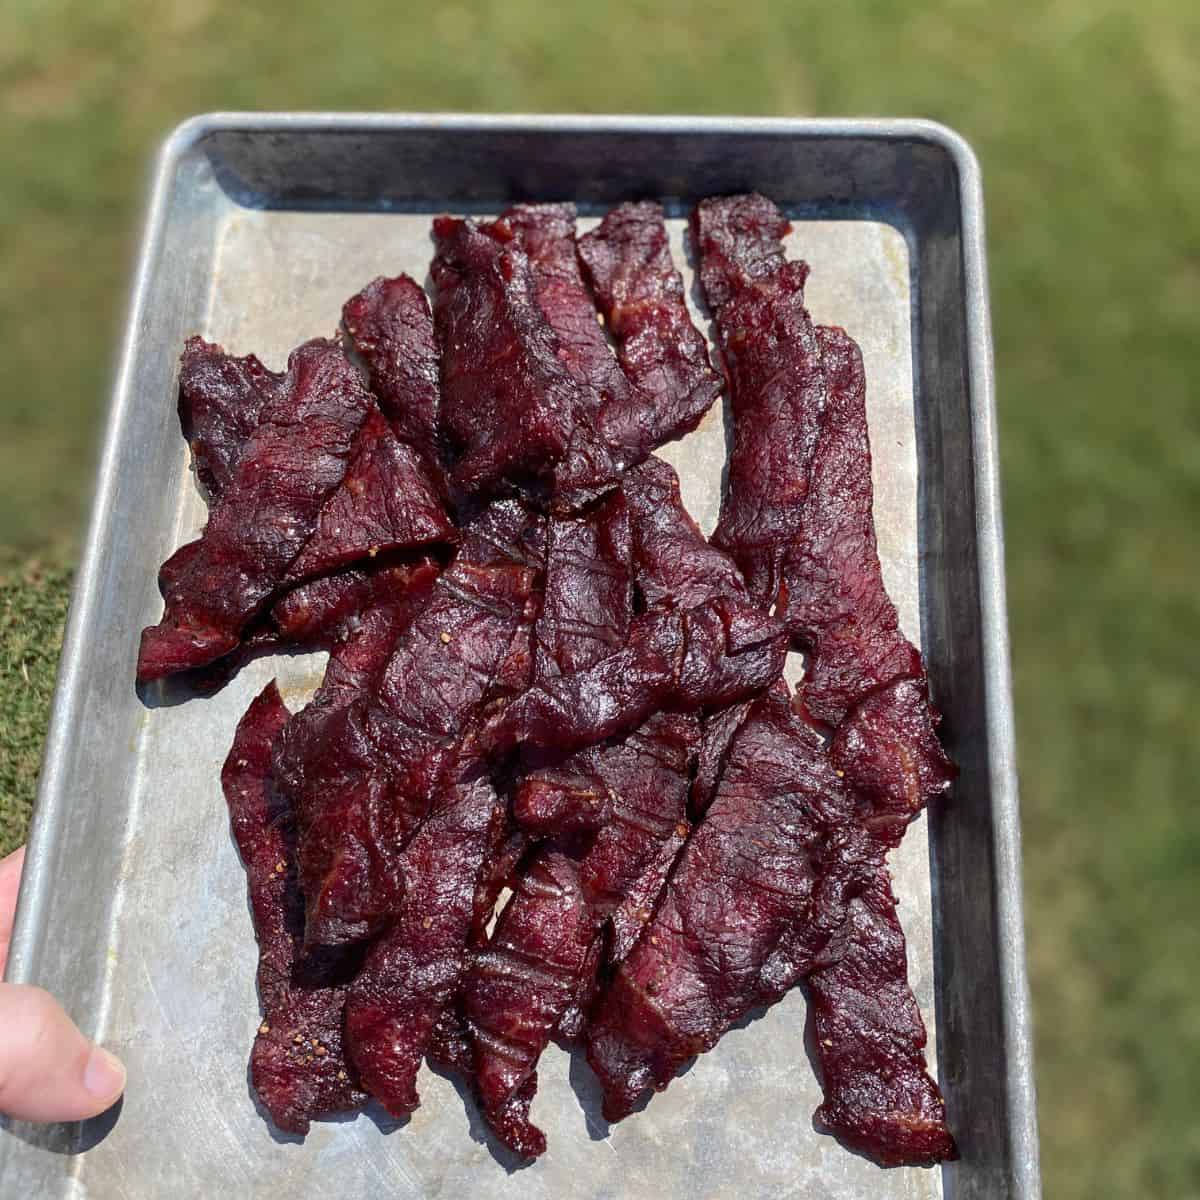 Maroon Beef Jerky on a baking pan held over grass